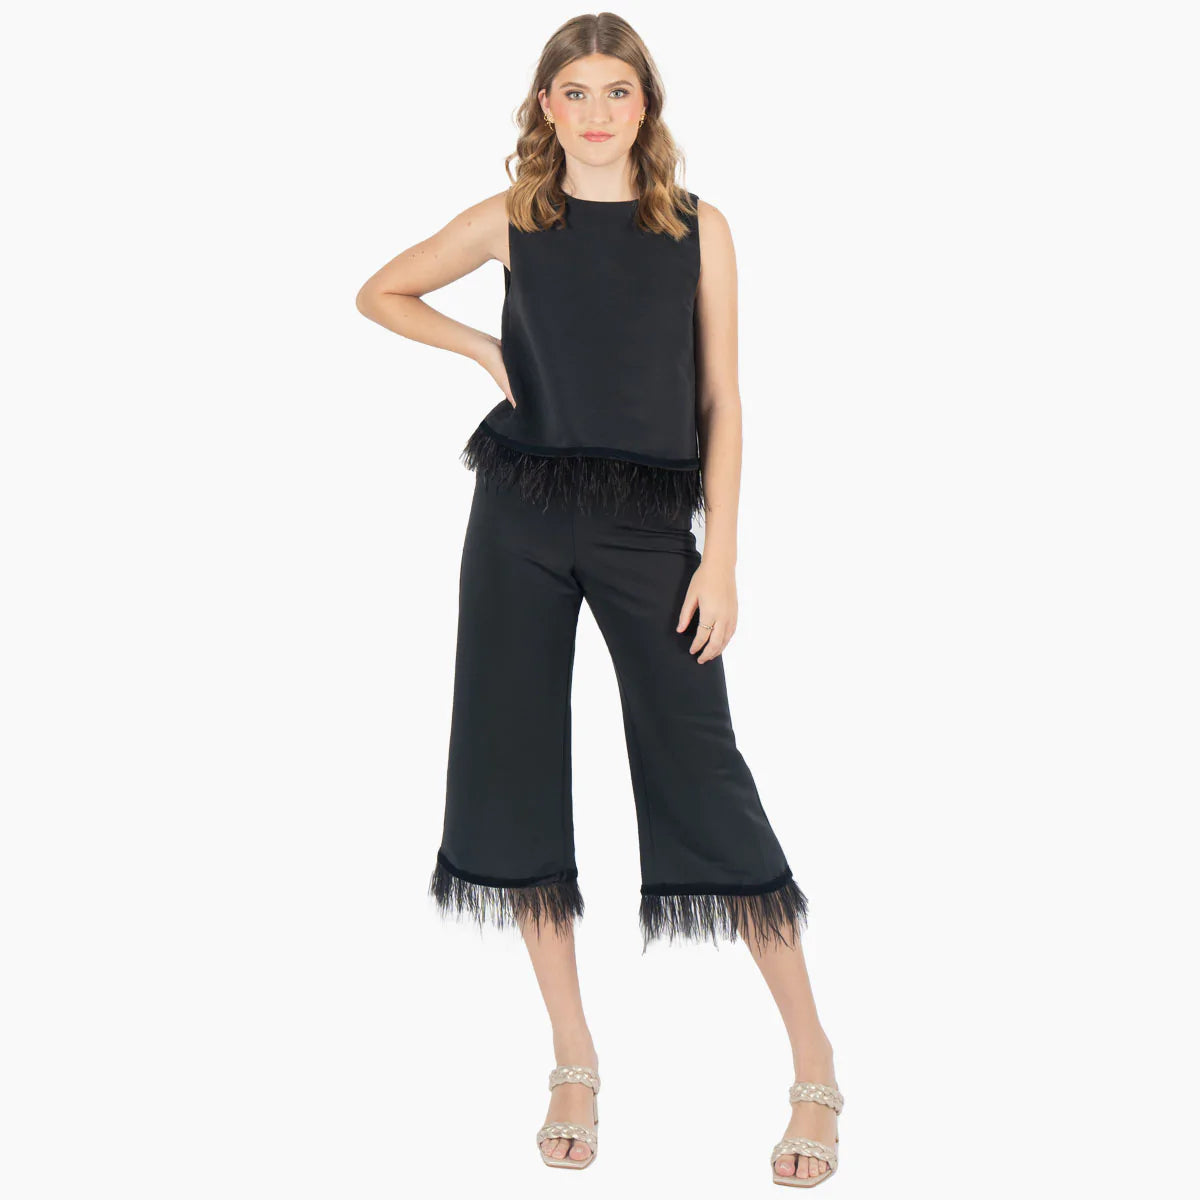 Party Top - Black Feather